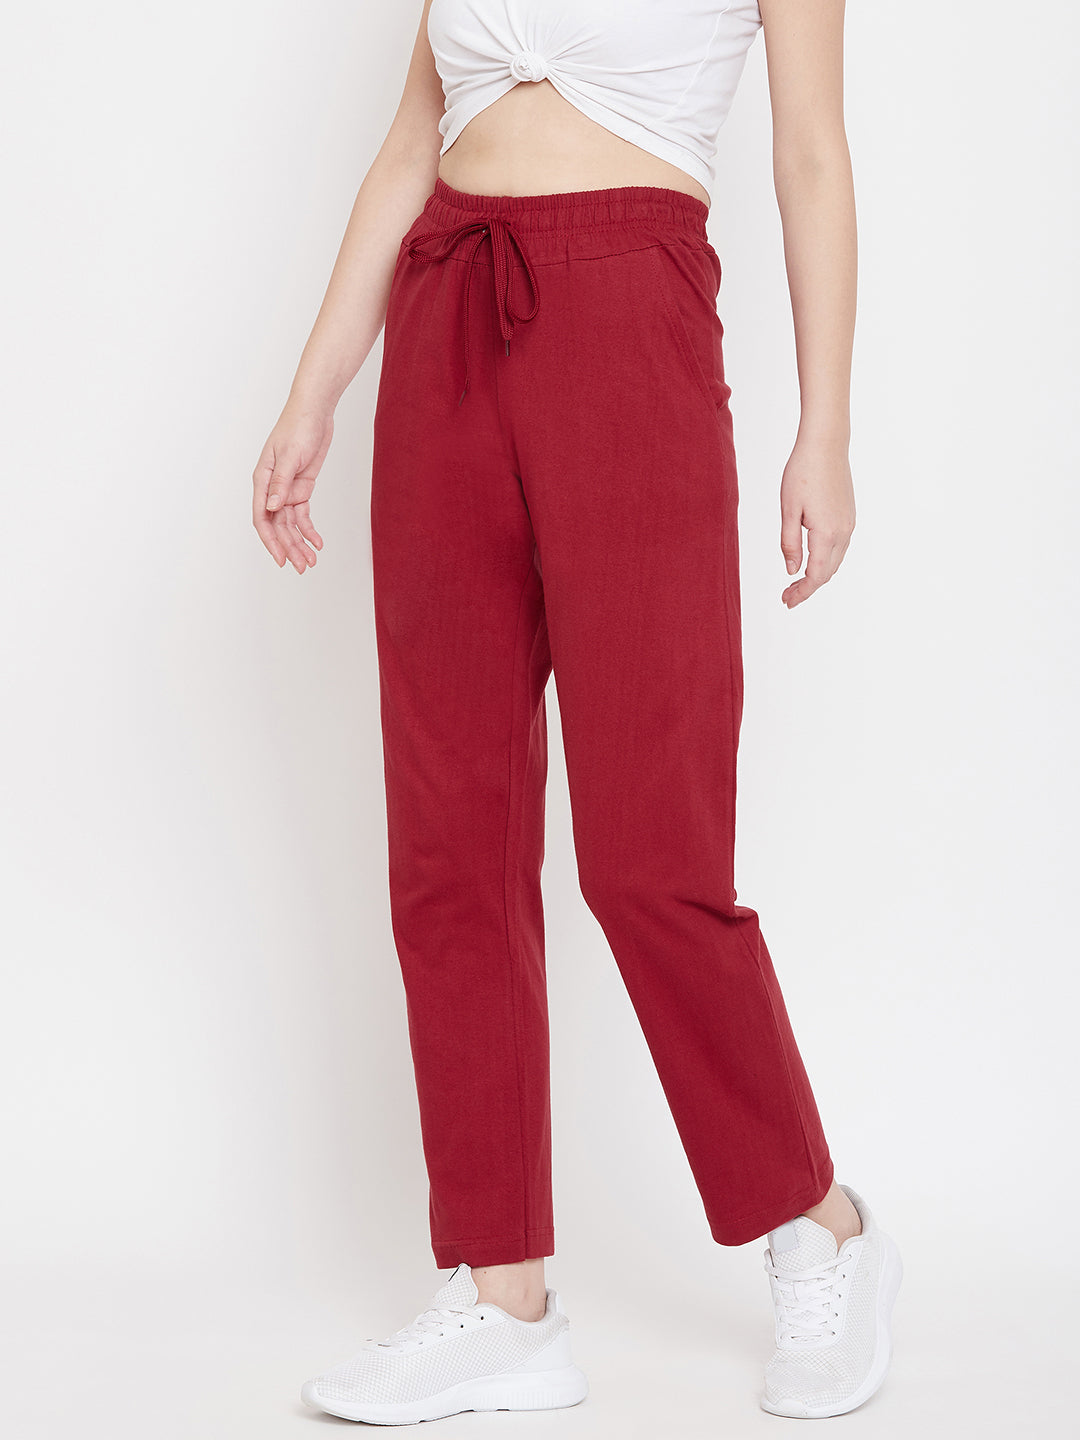 Women's Pack of 2 Track Pants-Black and Maroon